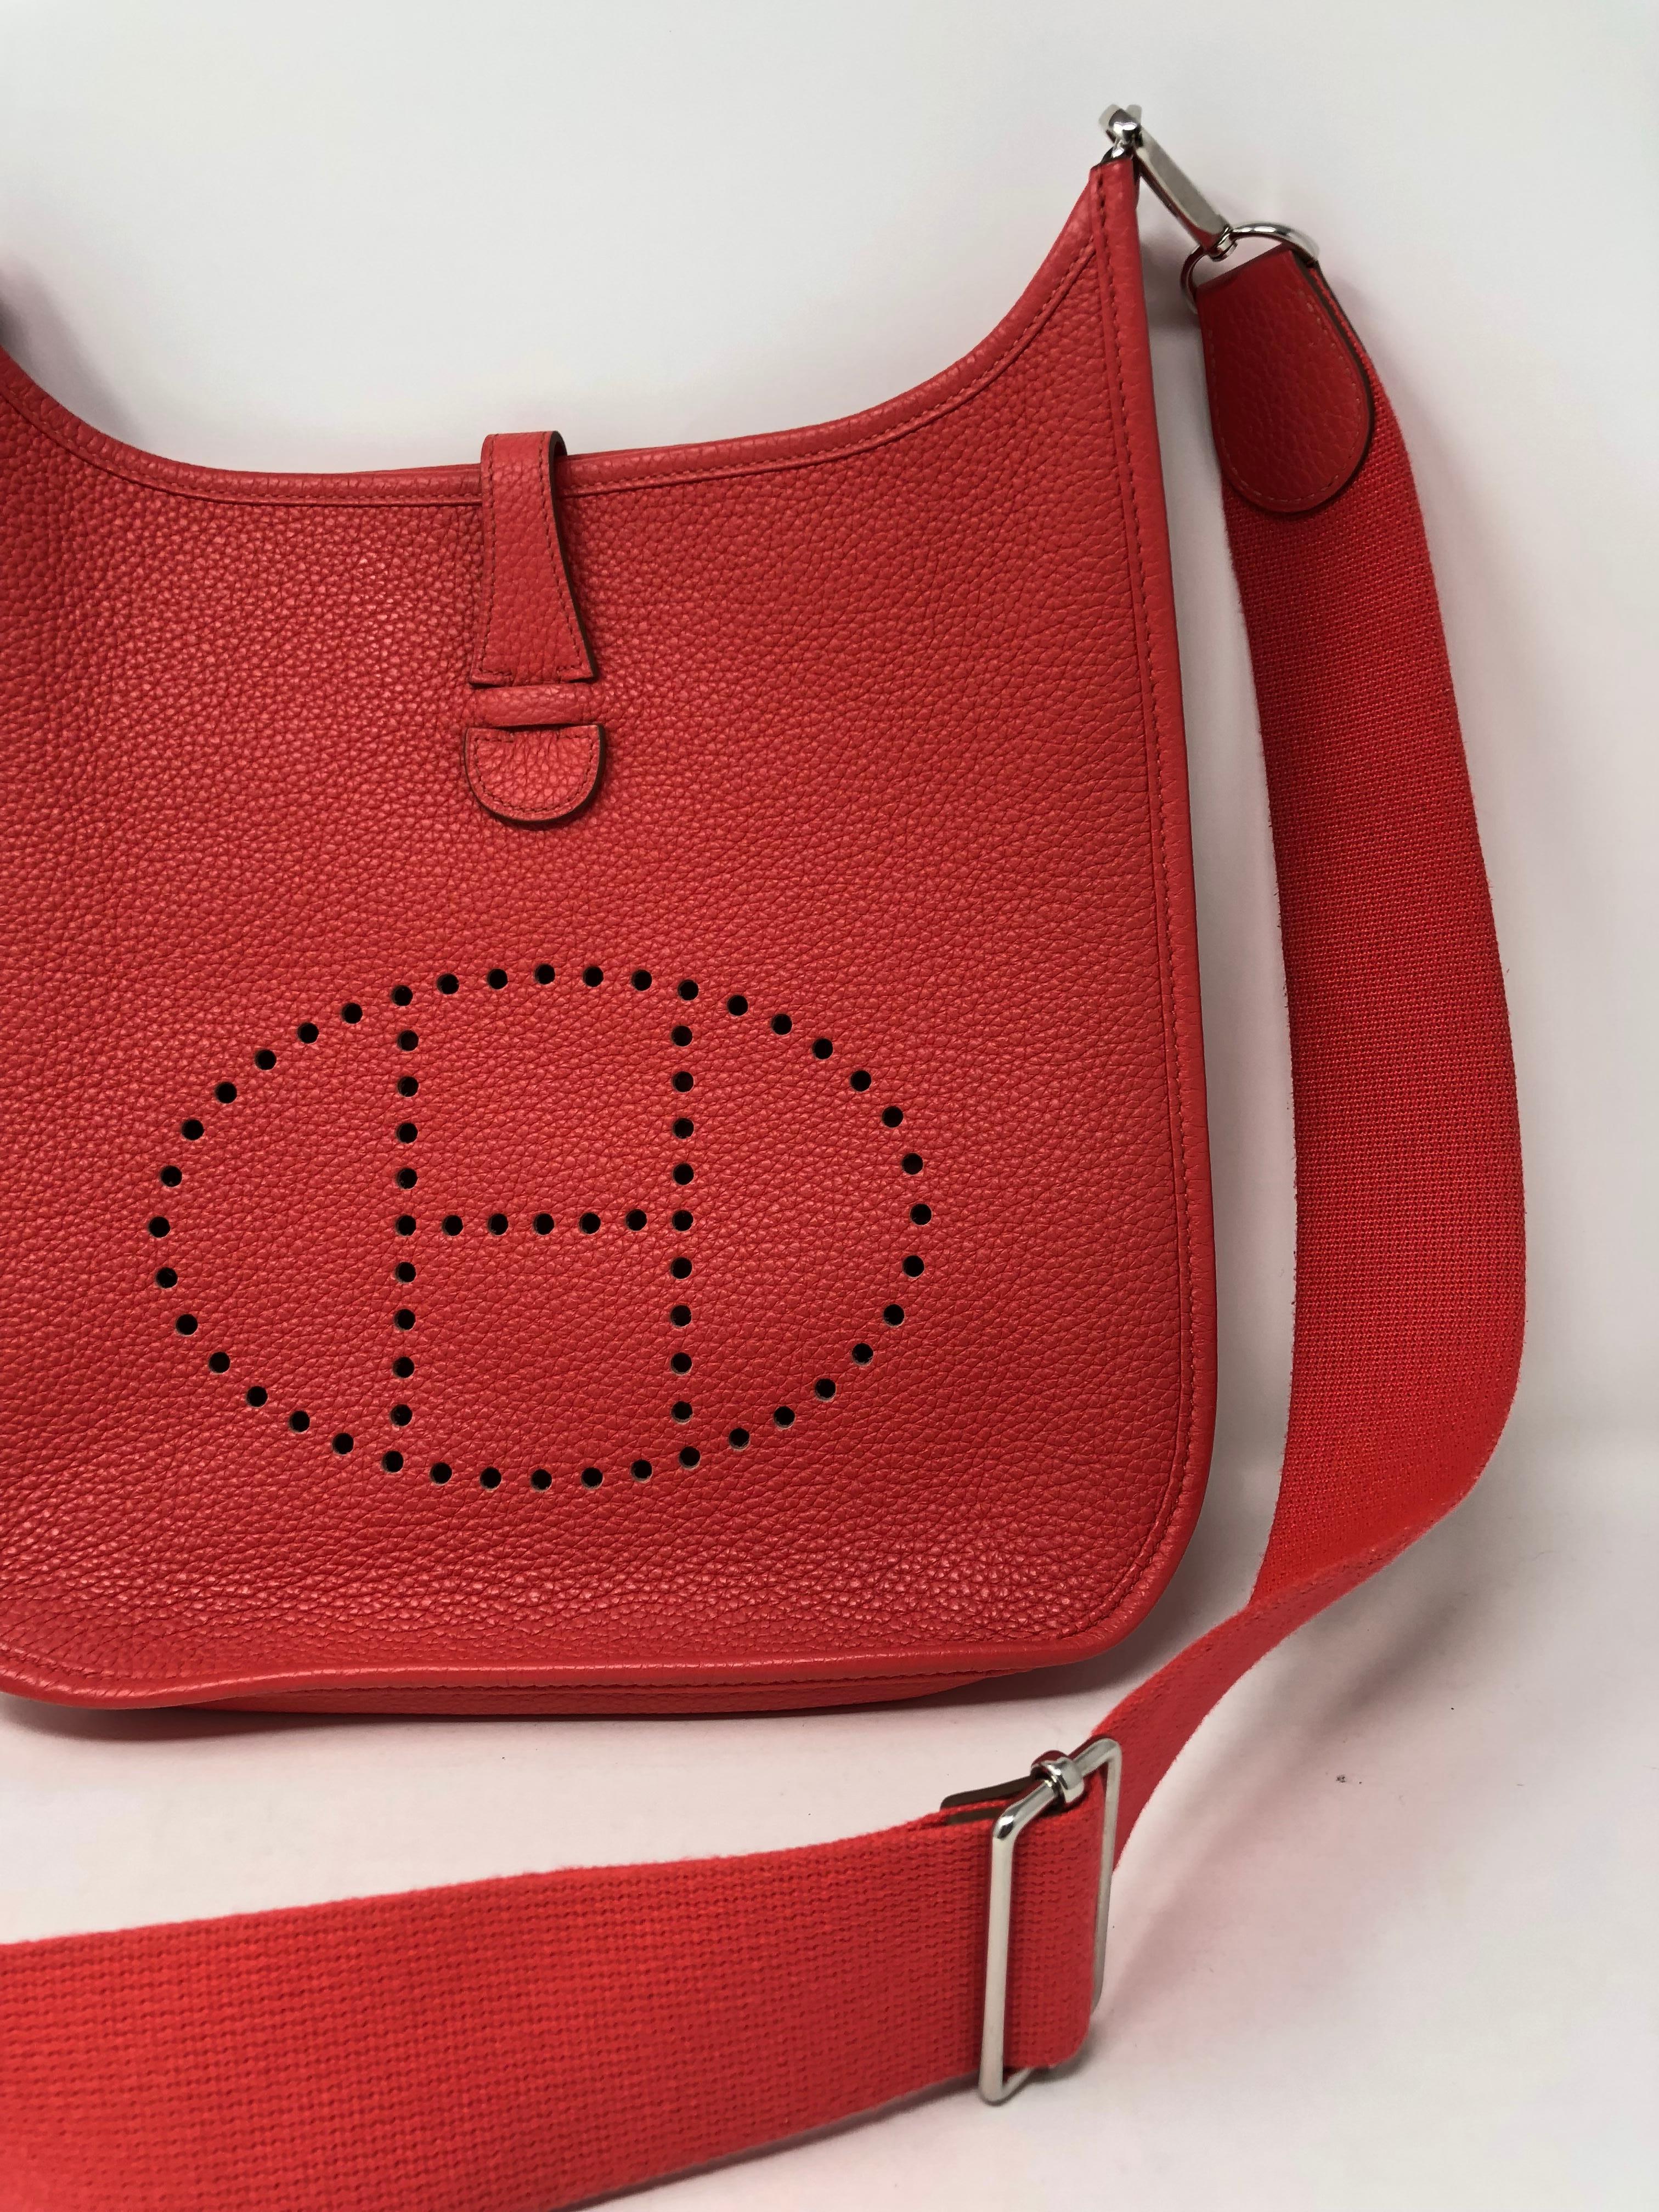 Hermes Evelyne GM in a coral/red color. Has pink hues in it. Mint condition crossbody that can be shortened. Series 3 Evelyne with the adjustable strap. Beautiful color that can bring a pop to any outfit. A favorite style among Hermes lovers. 